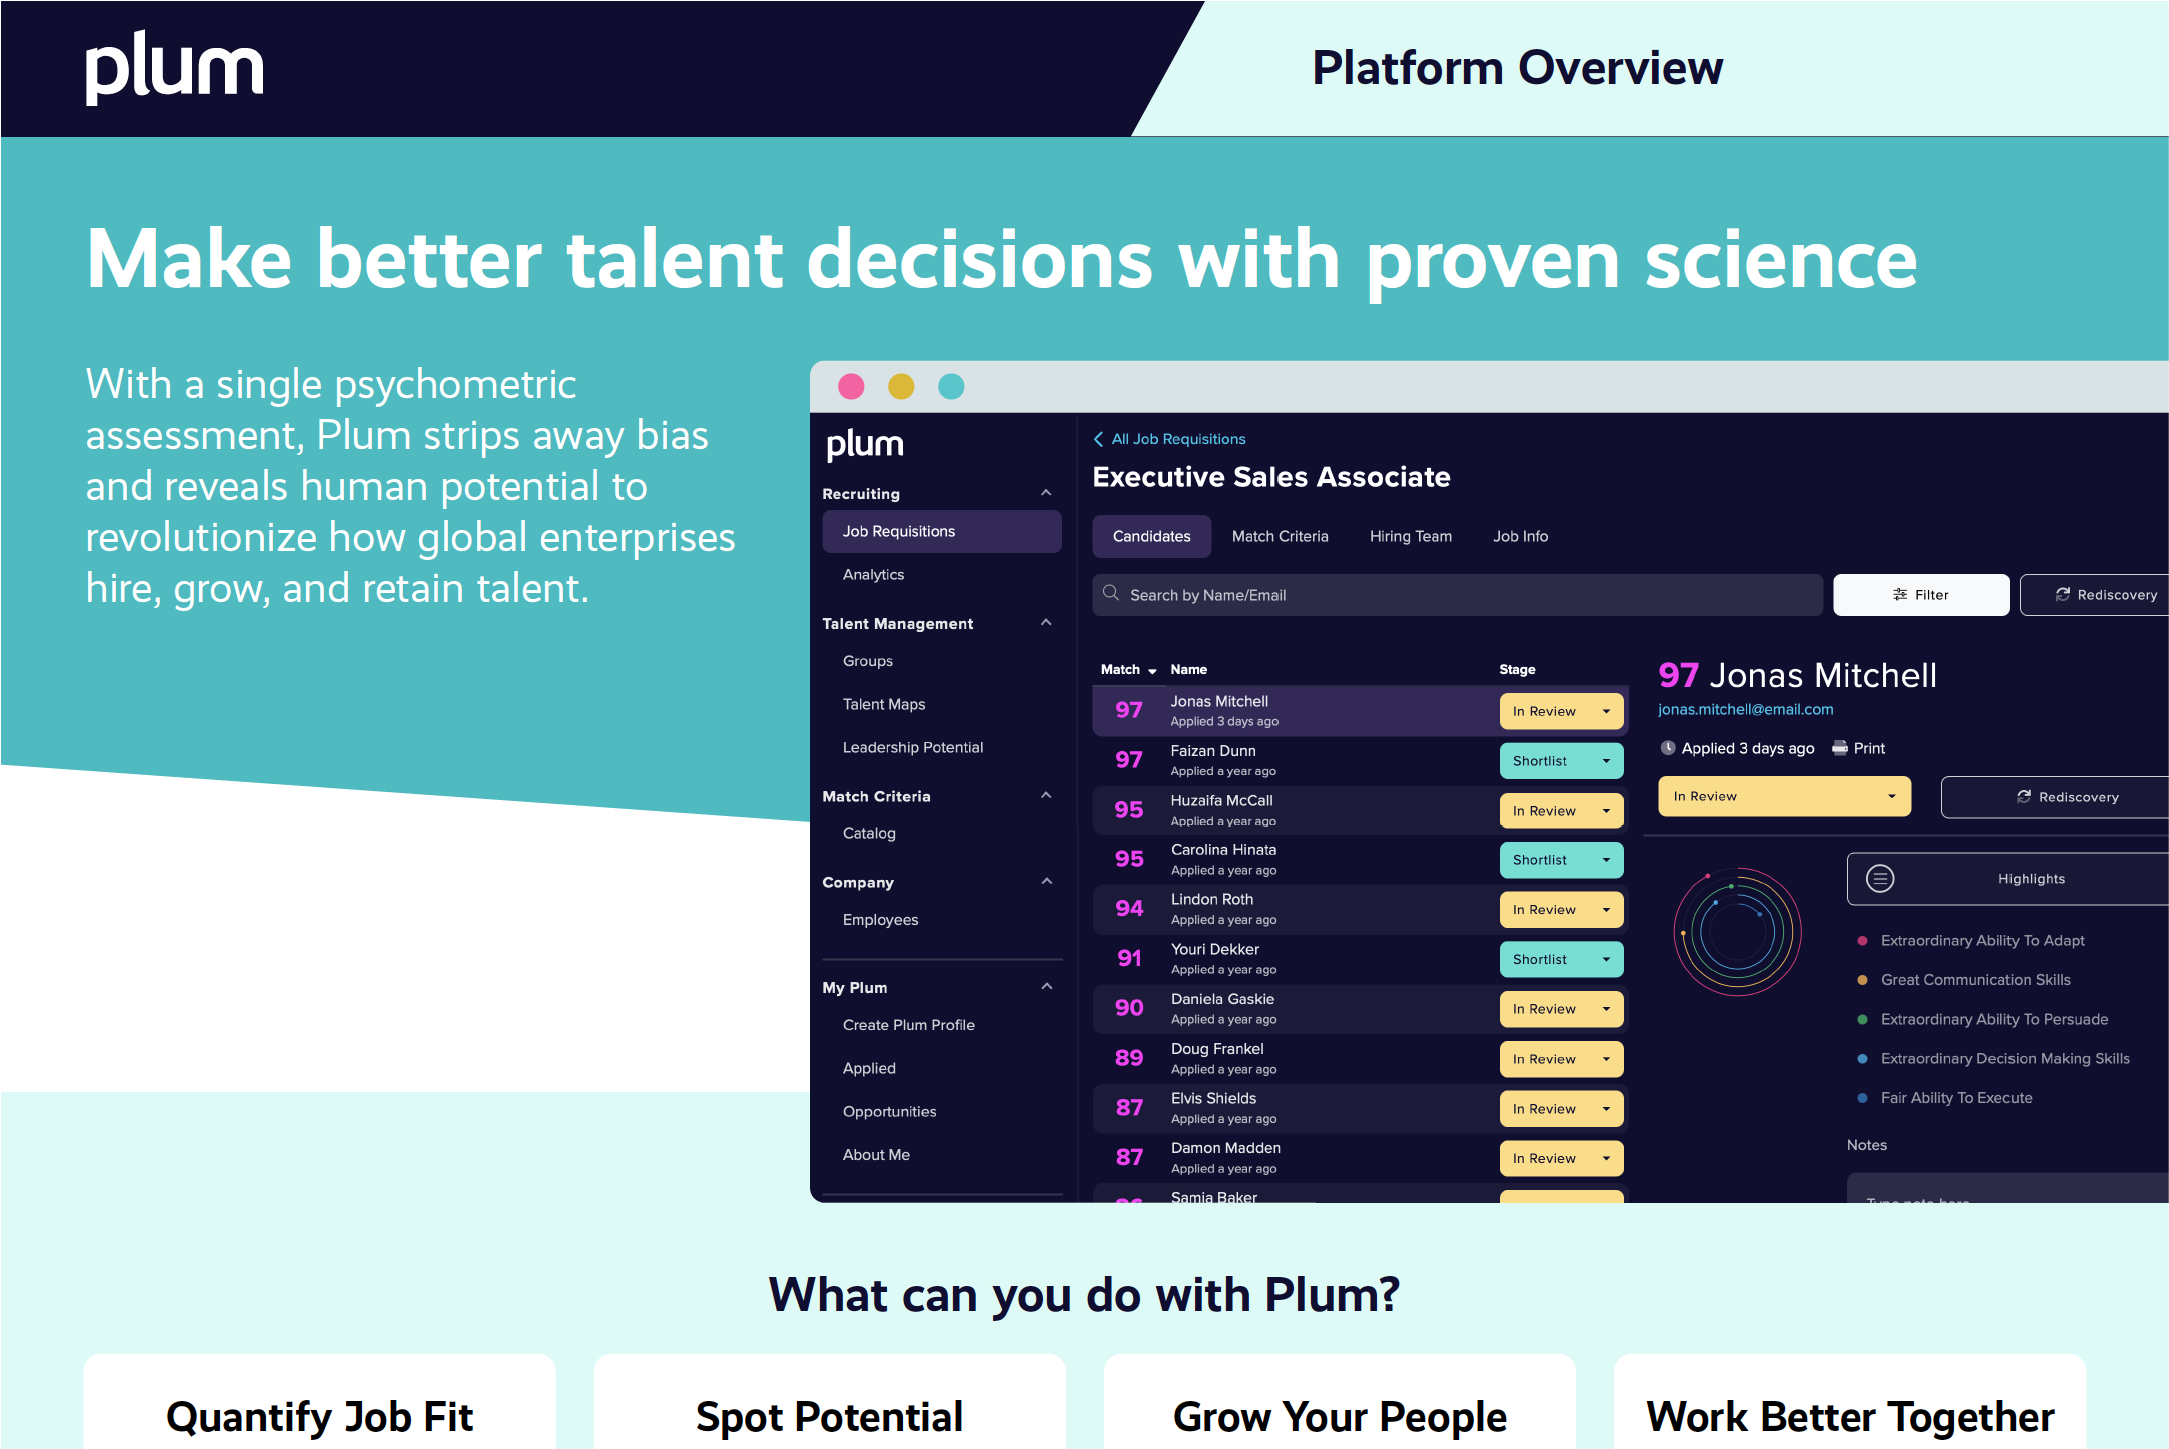 Make better talent decisions with proven science